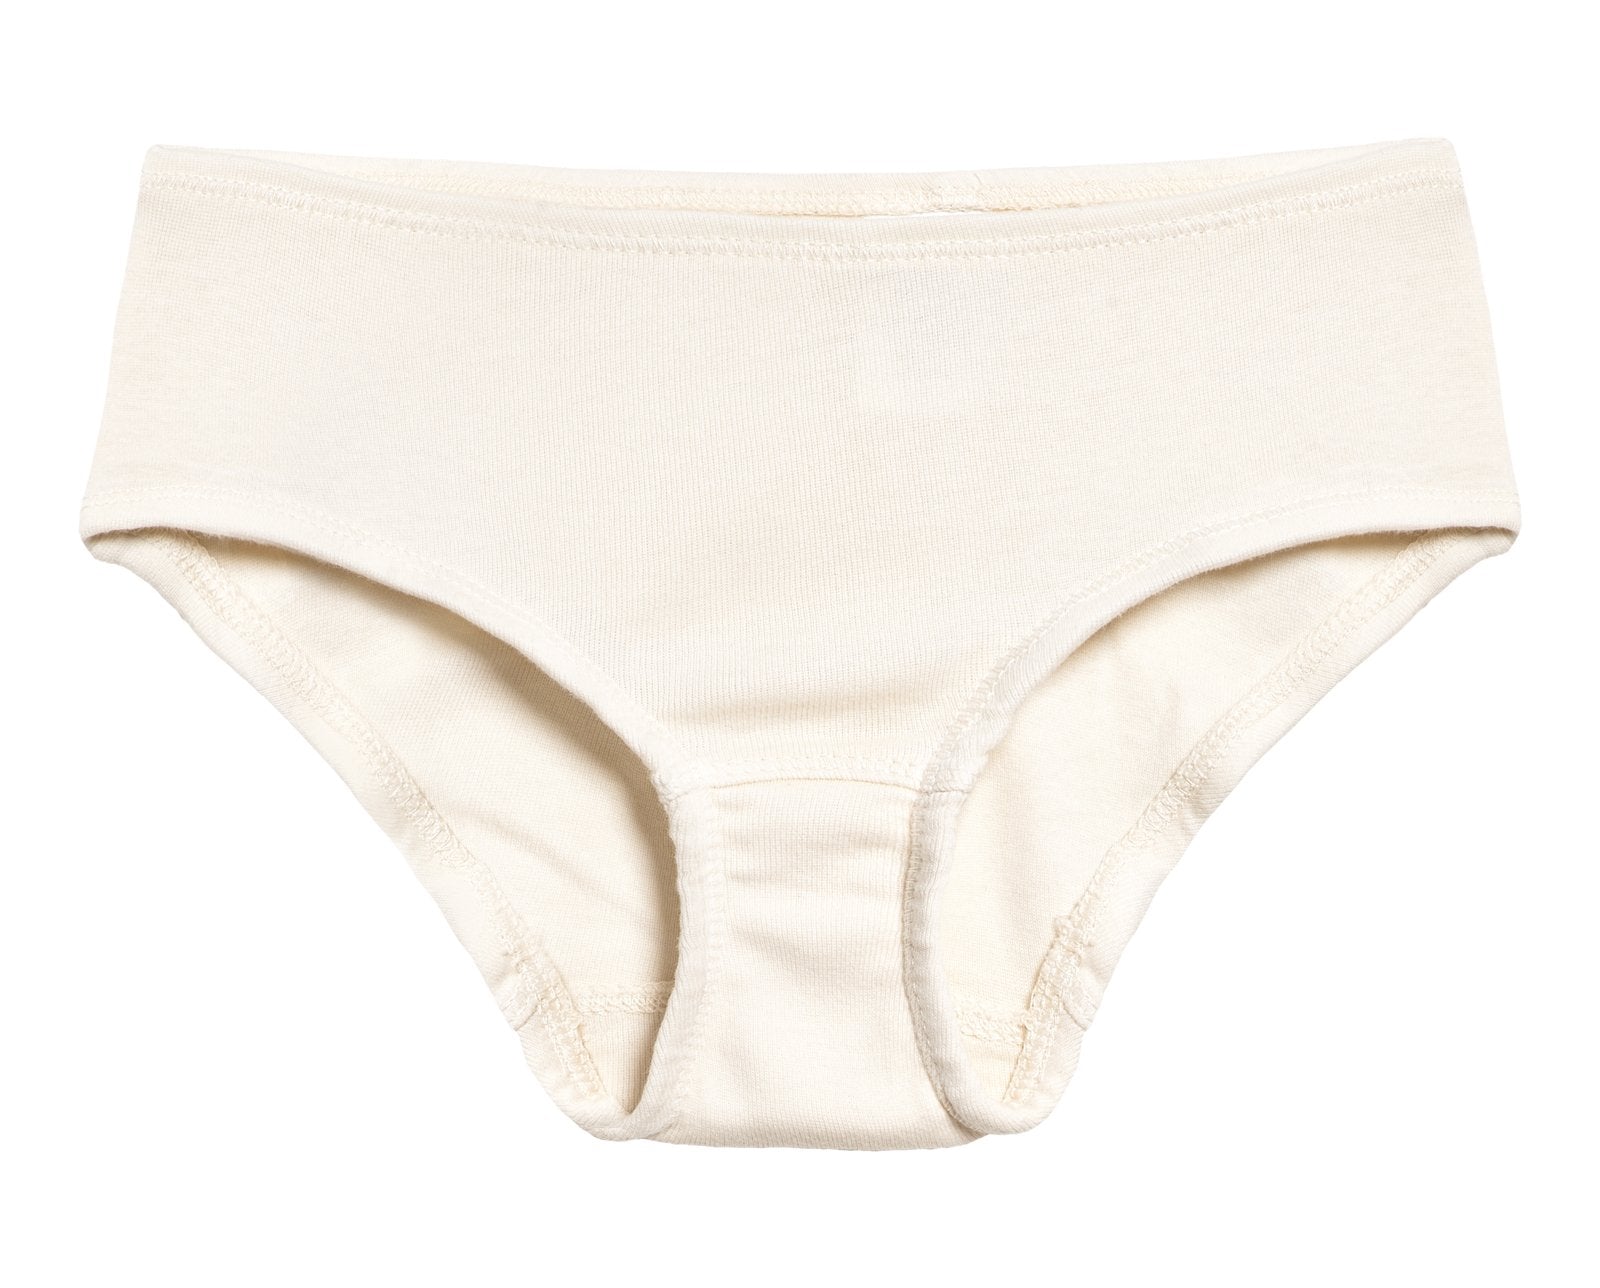 High-Leg Briefs in organic cotton, compostable at end of life